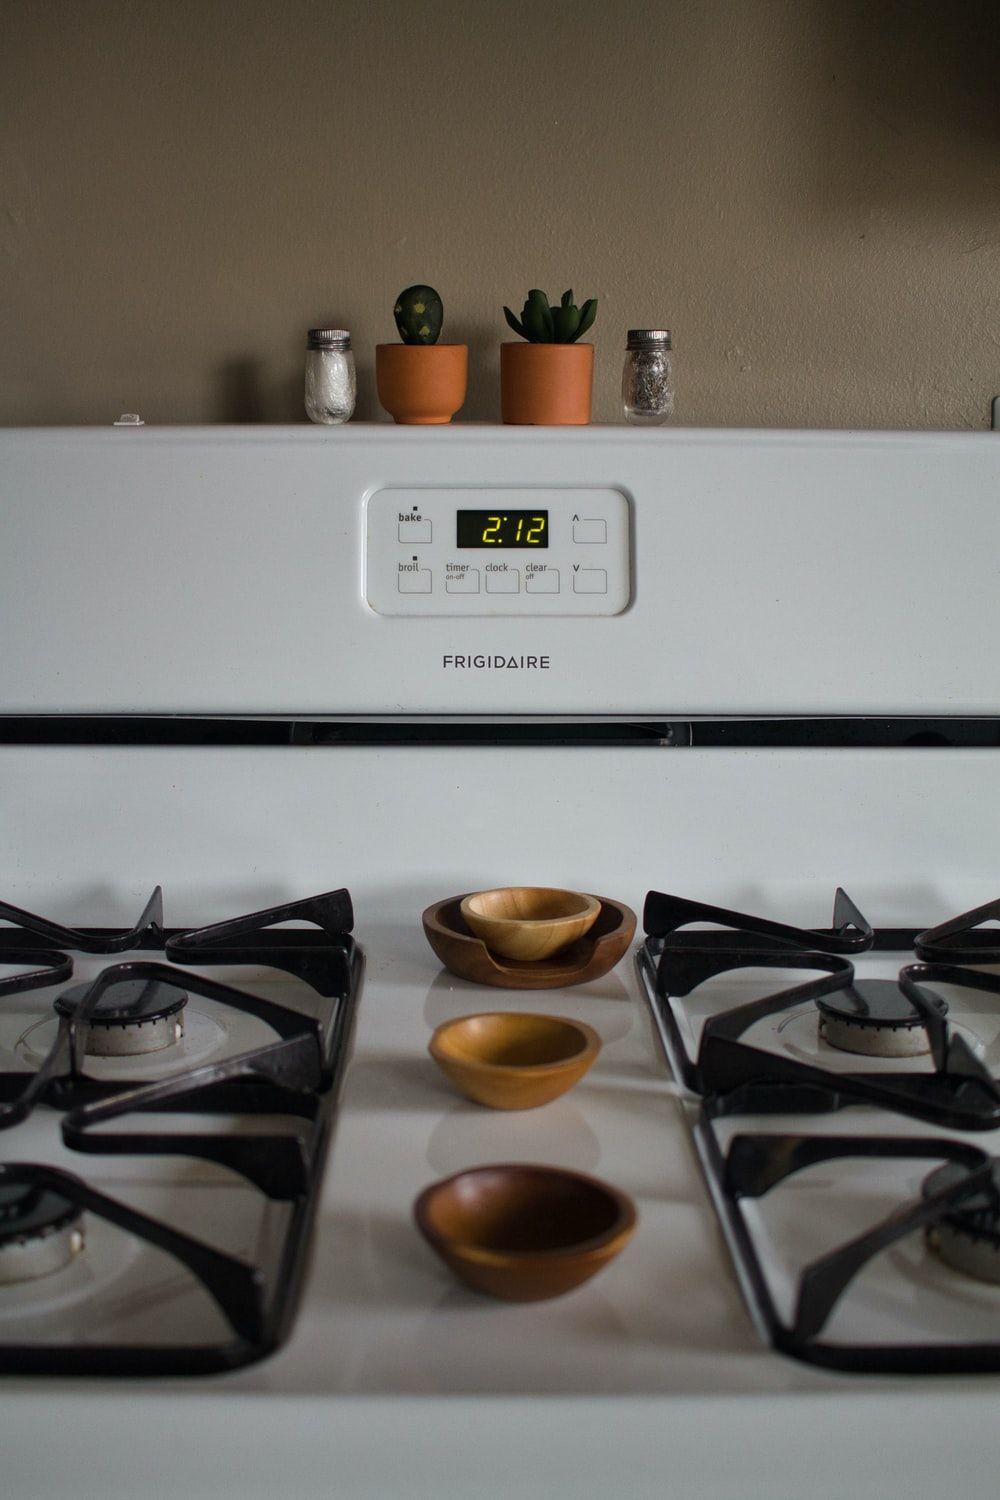 Stove Picture. Download Free Image